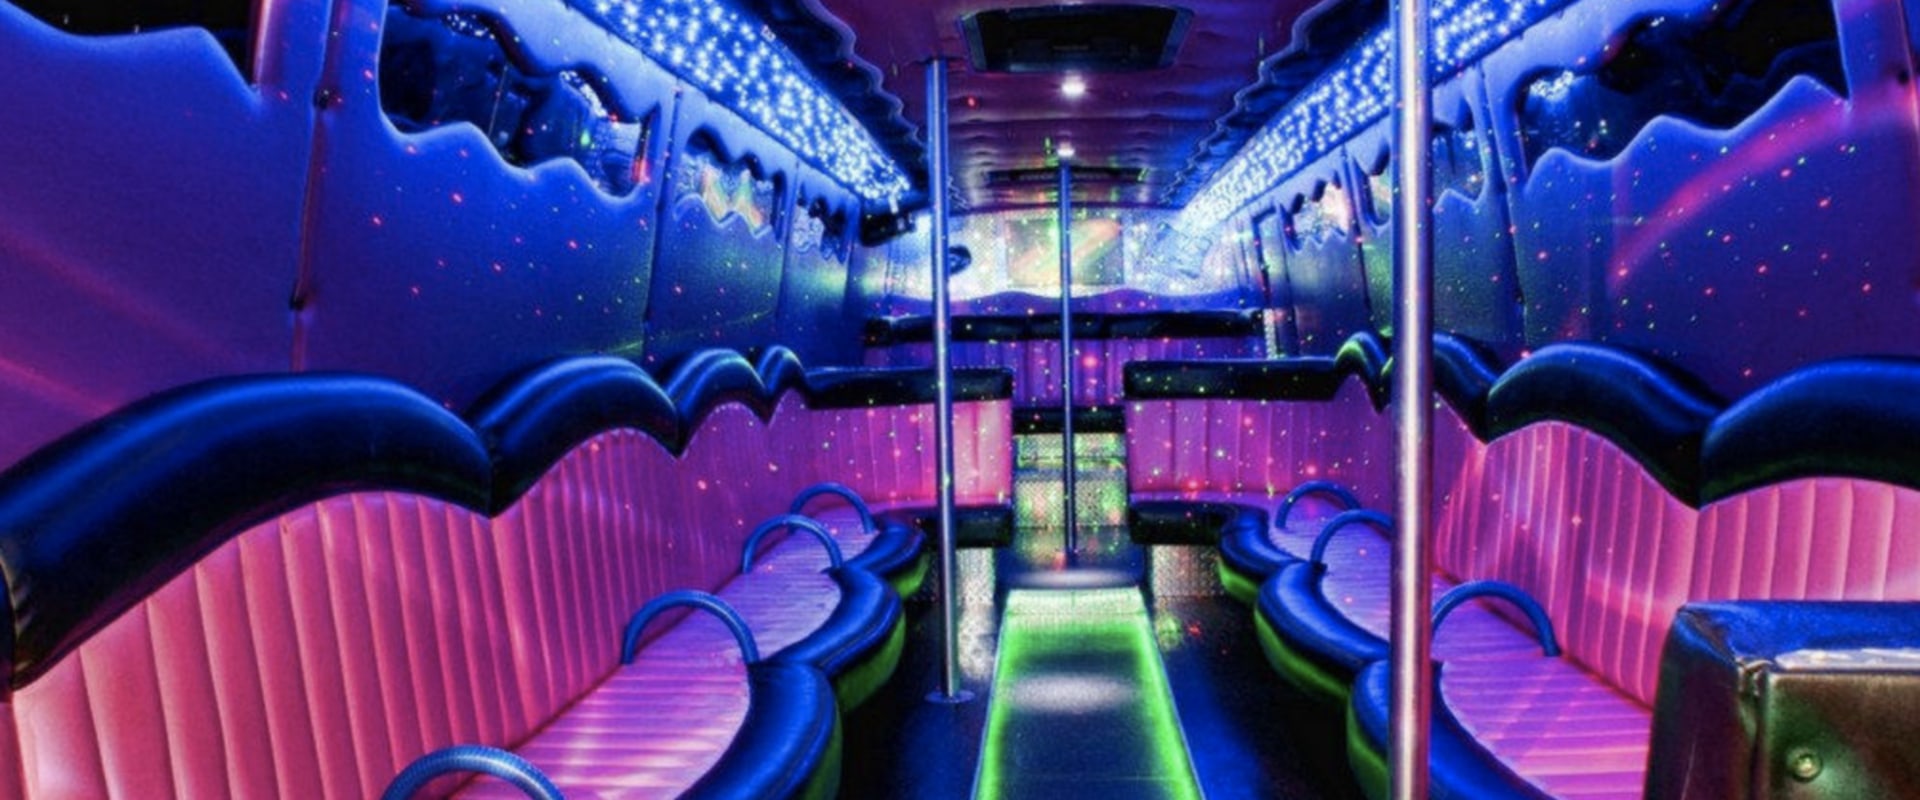 How much does a party bus cost nyc?